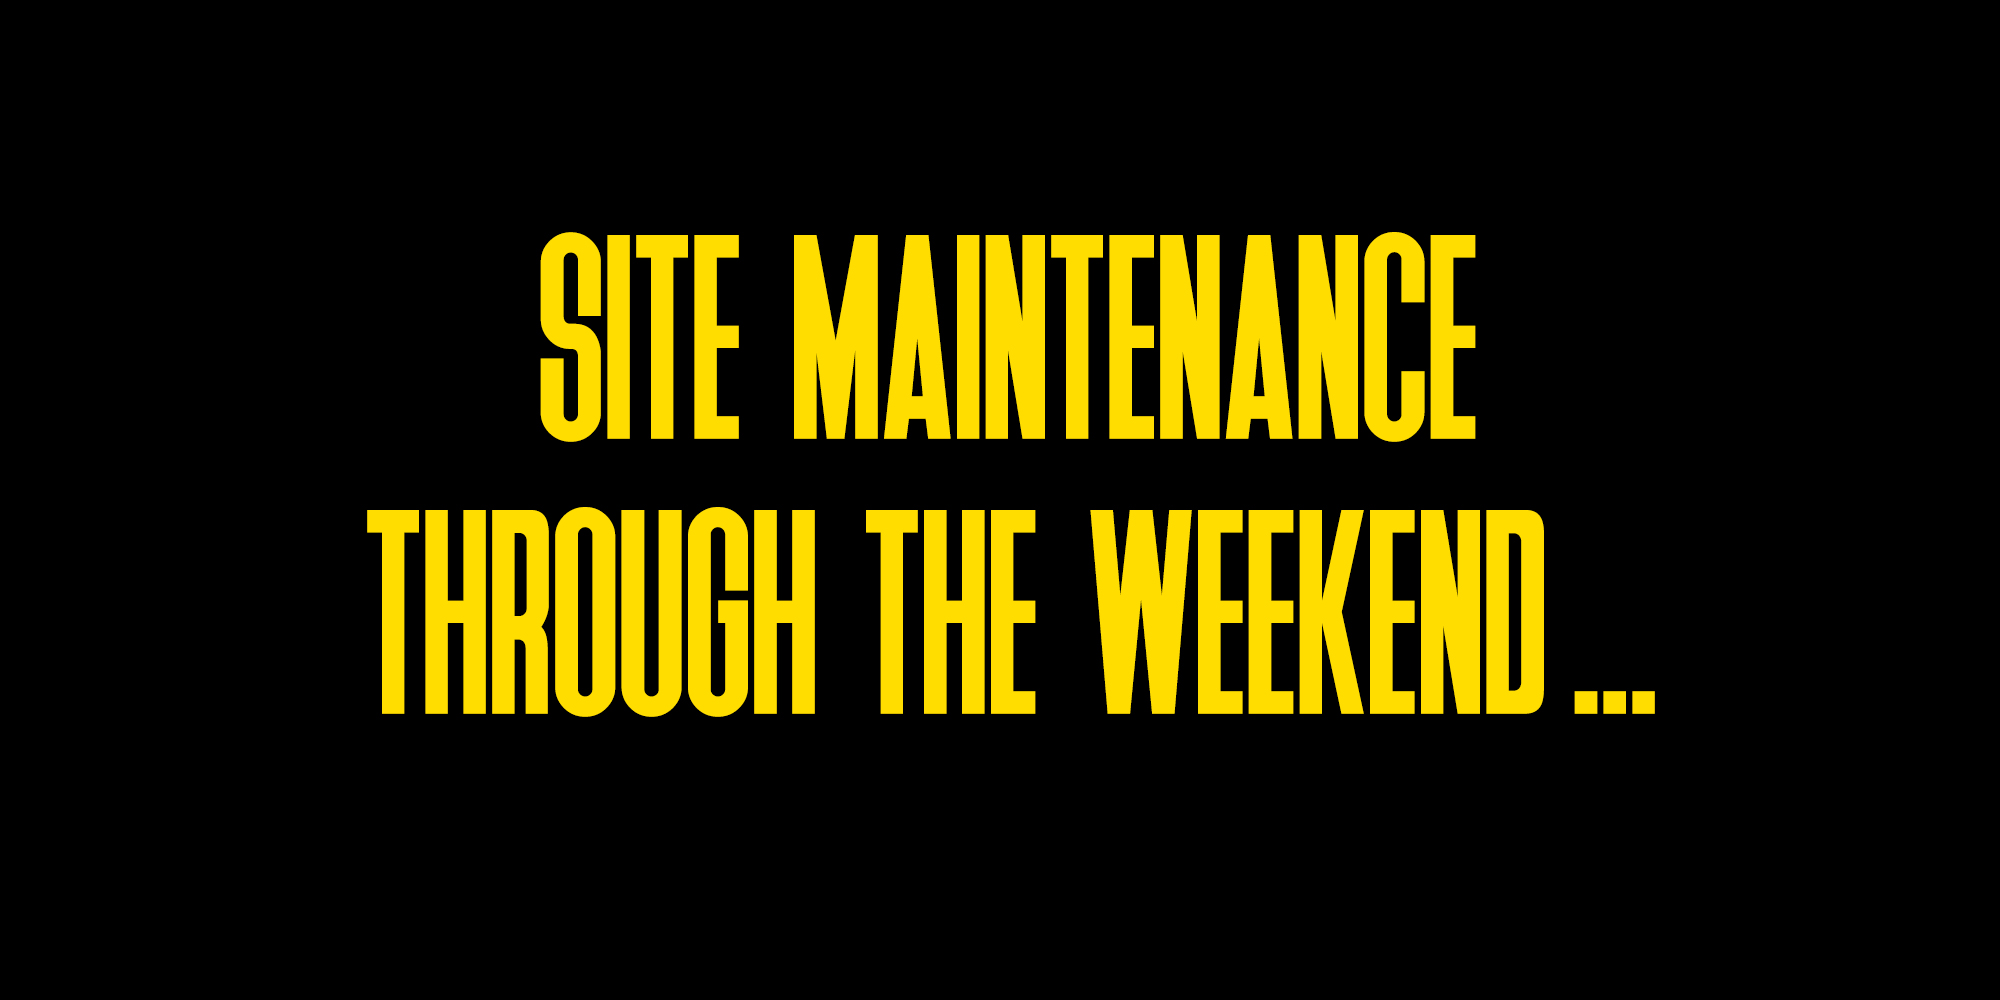 Site Maintenance Through The Weekend